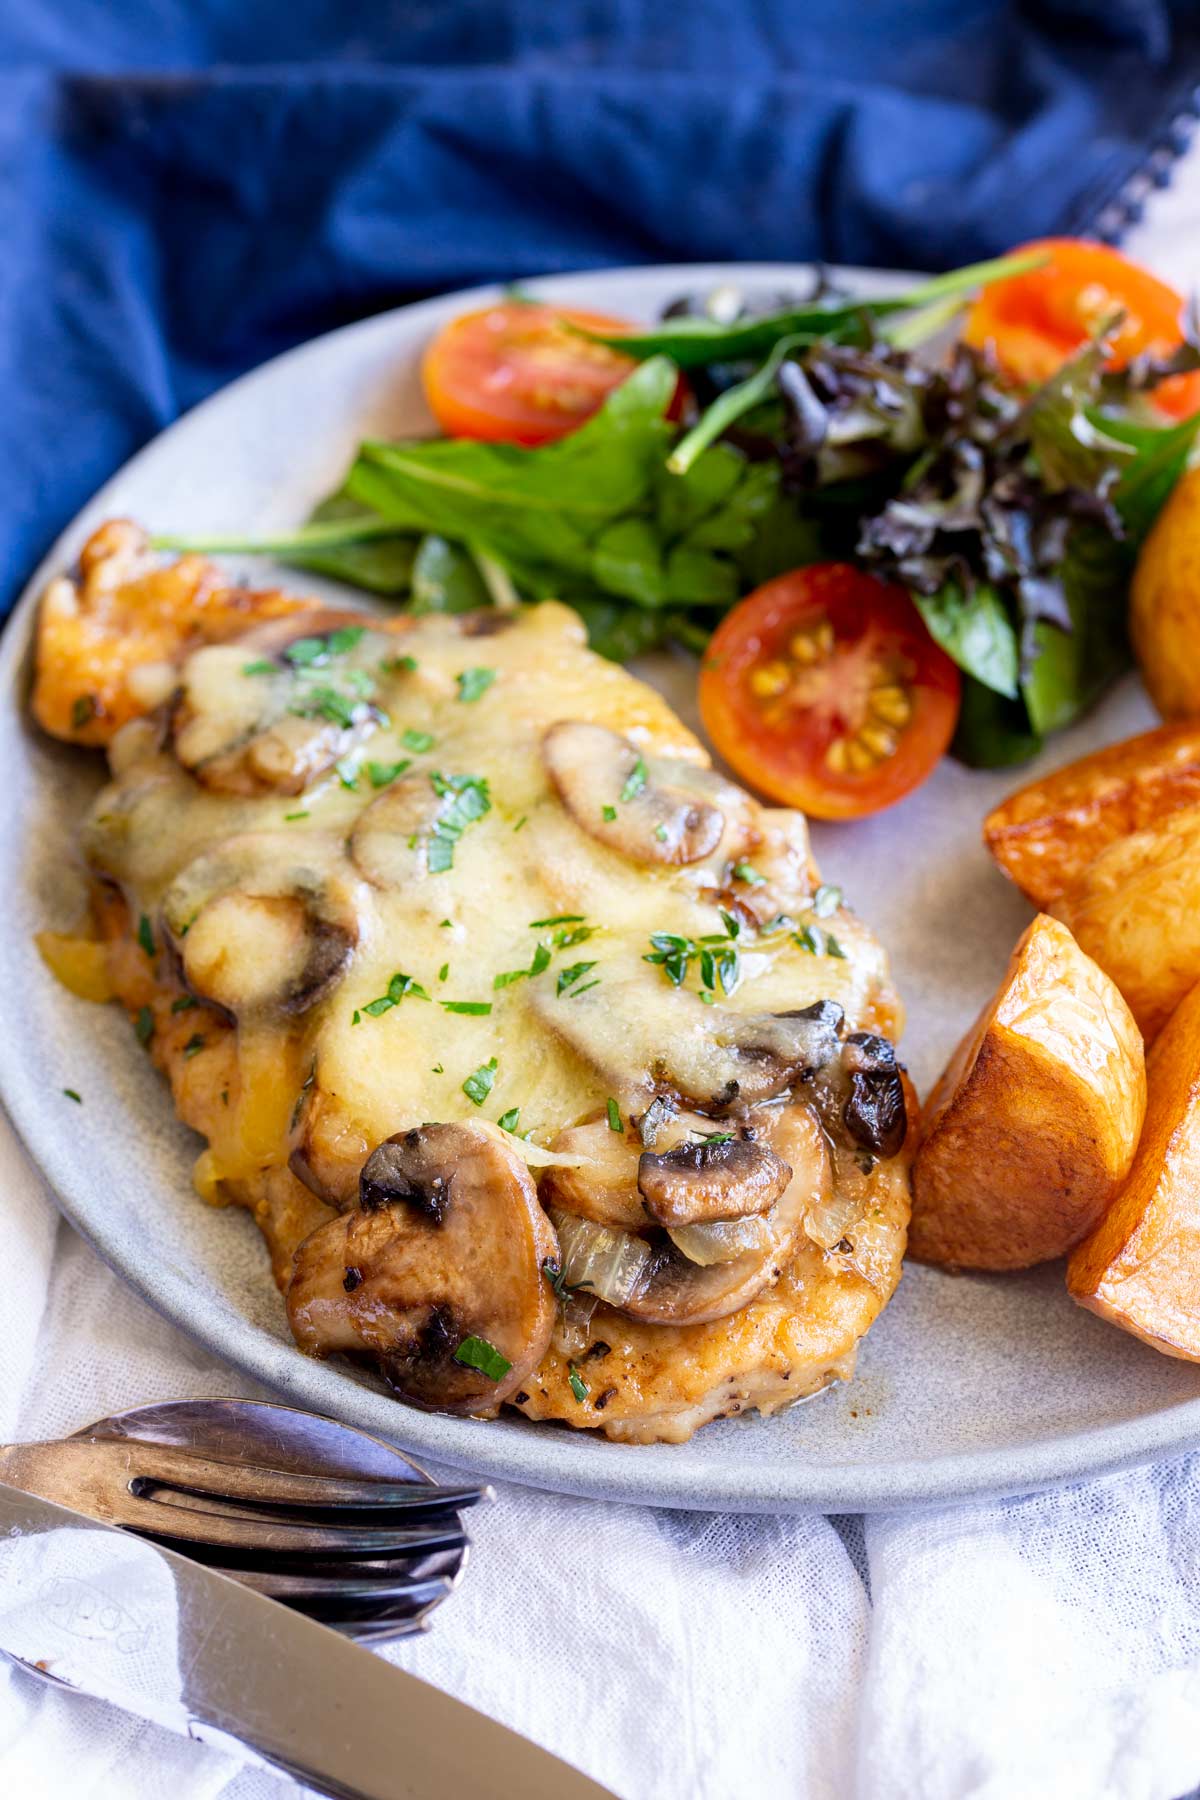 a chicken breast with mushrooms and cheese on a plate with salad and potatoes